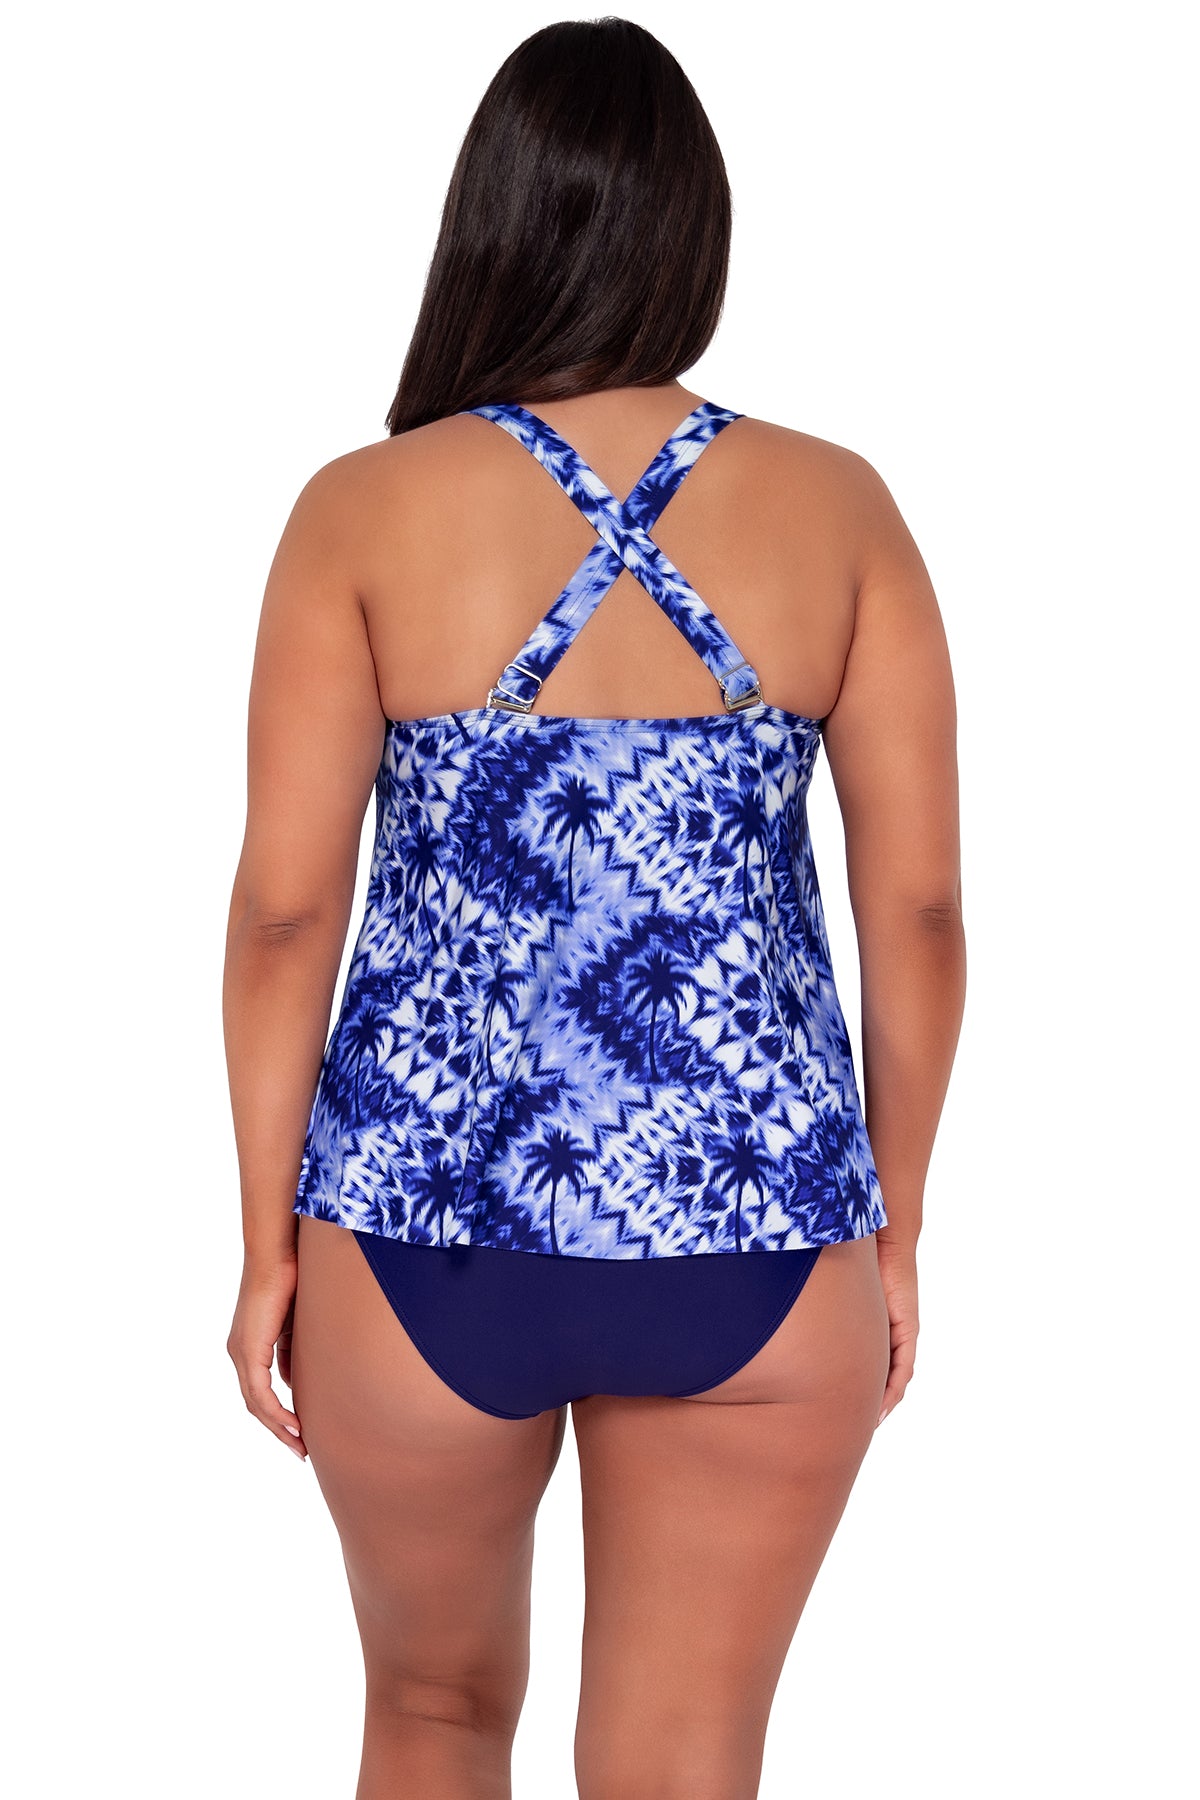 Back pose #1 of Nicki wearing Sunsets Escape Tulum Sadie Tankini Top showing crossback straps paired with Indigo Hannah High Waist